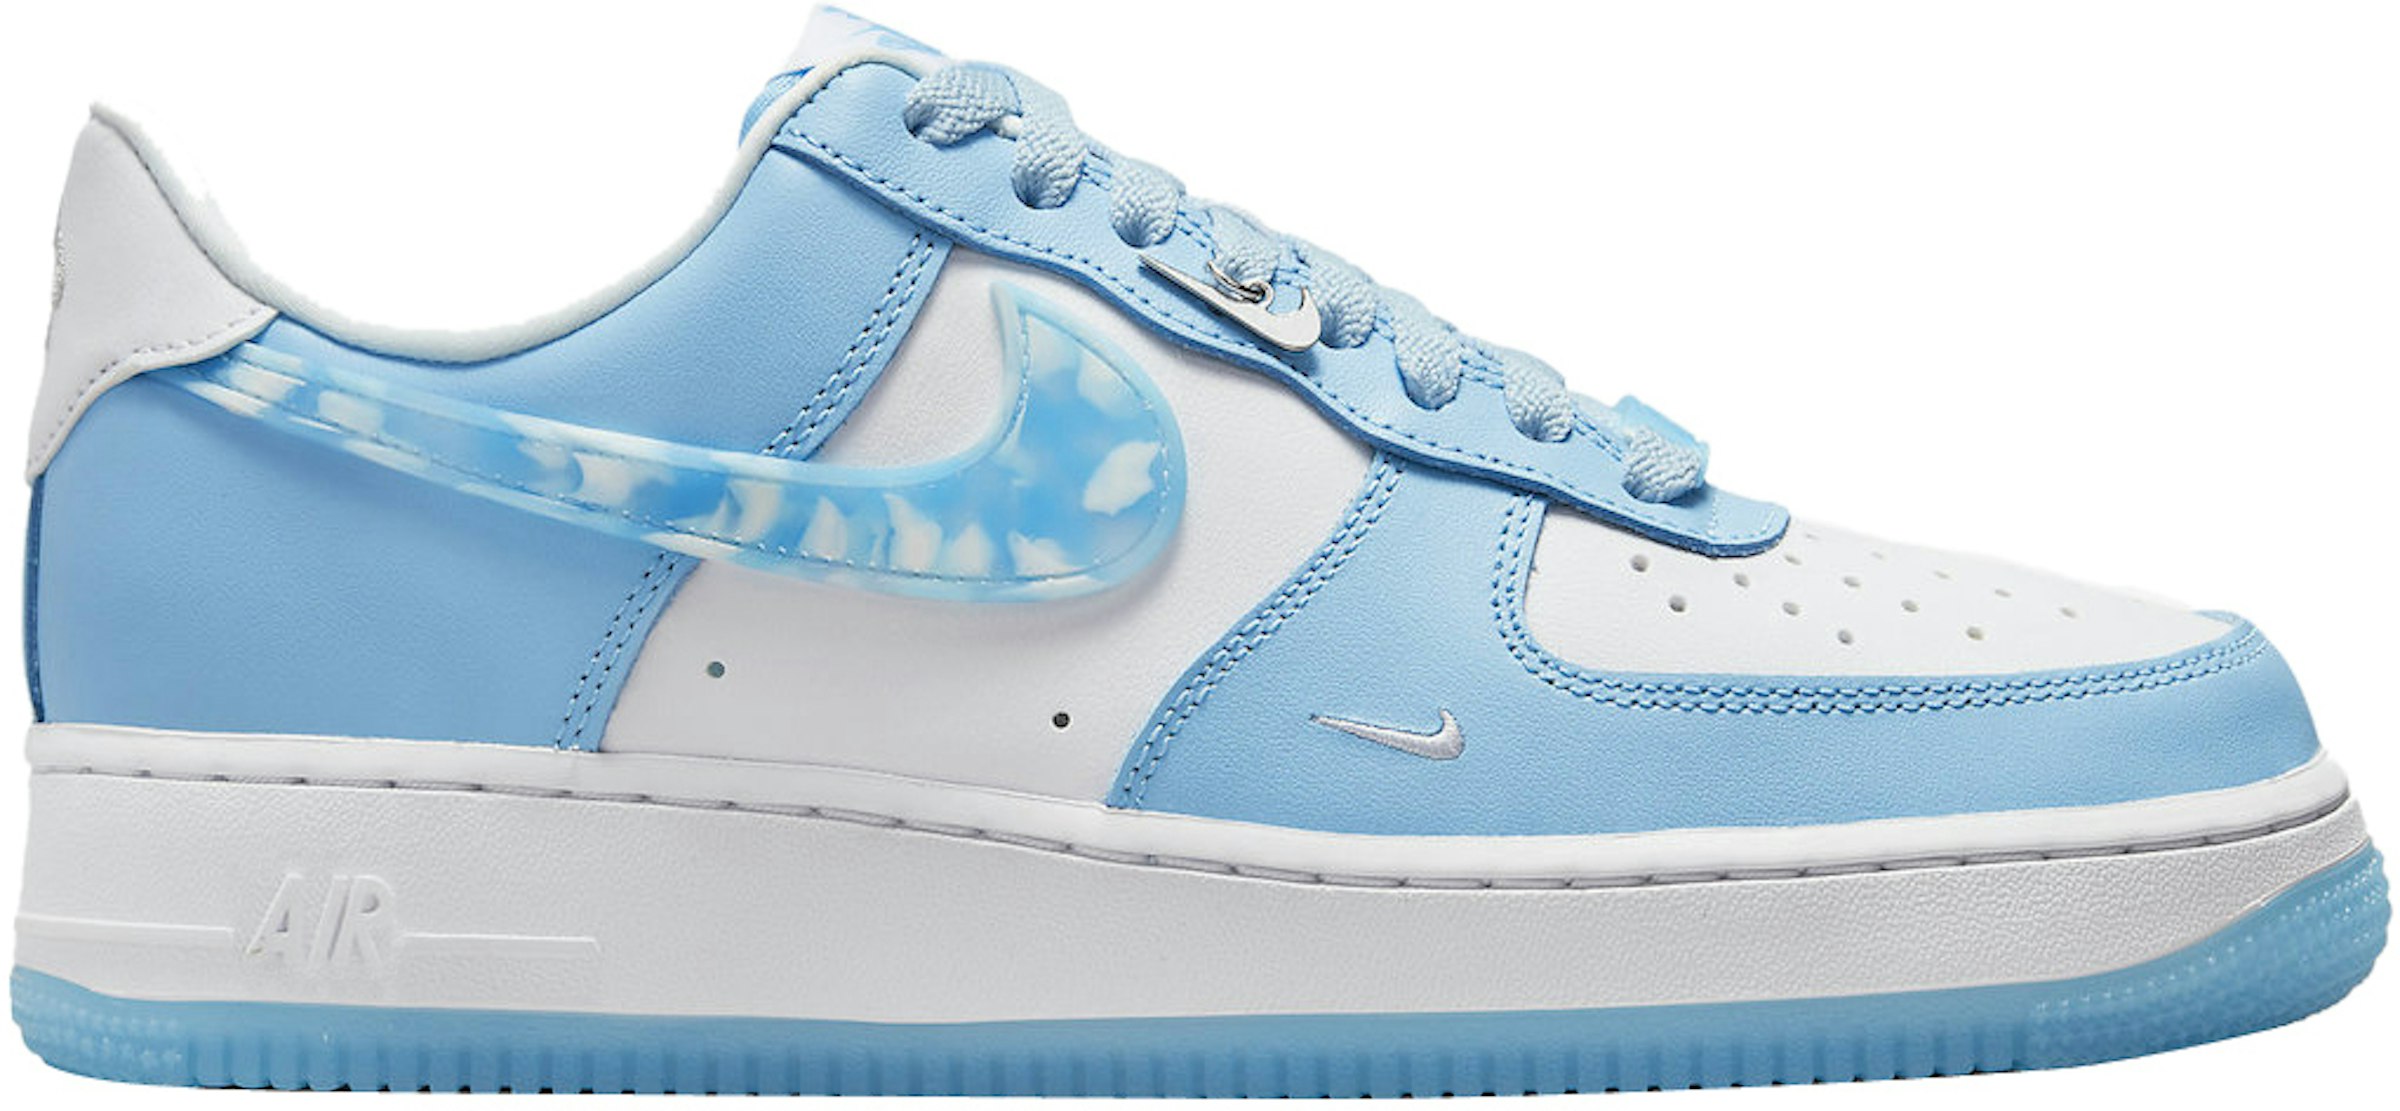 Nike Air Force 1 Low White Blue (Women's) - DX2937-100 - US